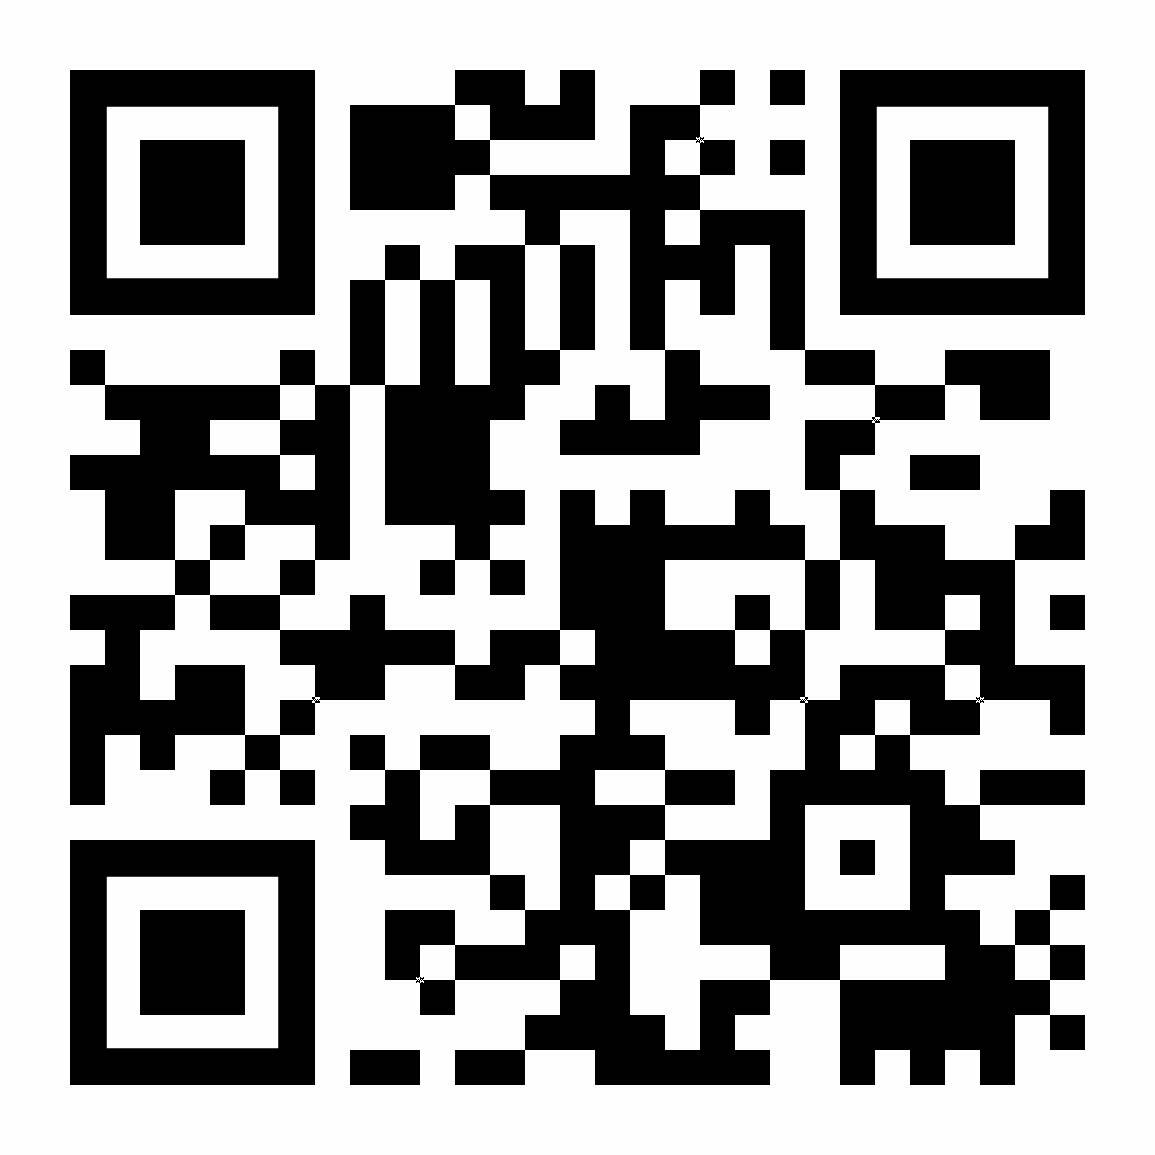 Scan this QR code to vote for Simon the cat.
Scan this QR code to vote for Simon the cat.